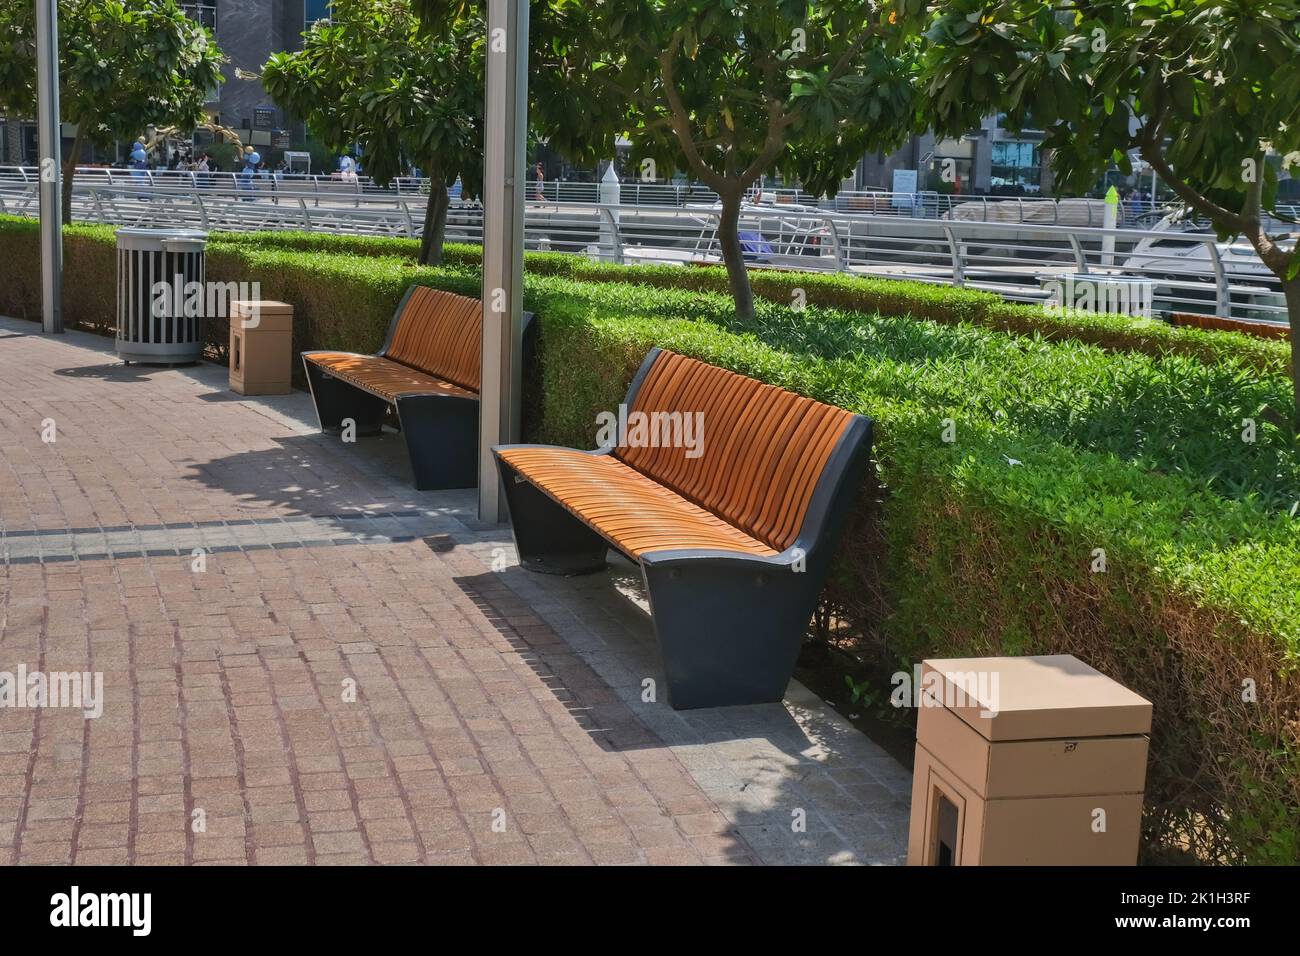 Recreation area with empty contemporary wooden benches along curved green plant fence.Urban modern public furniture. Stock Photo